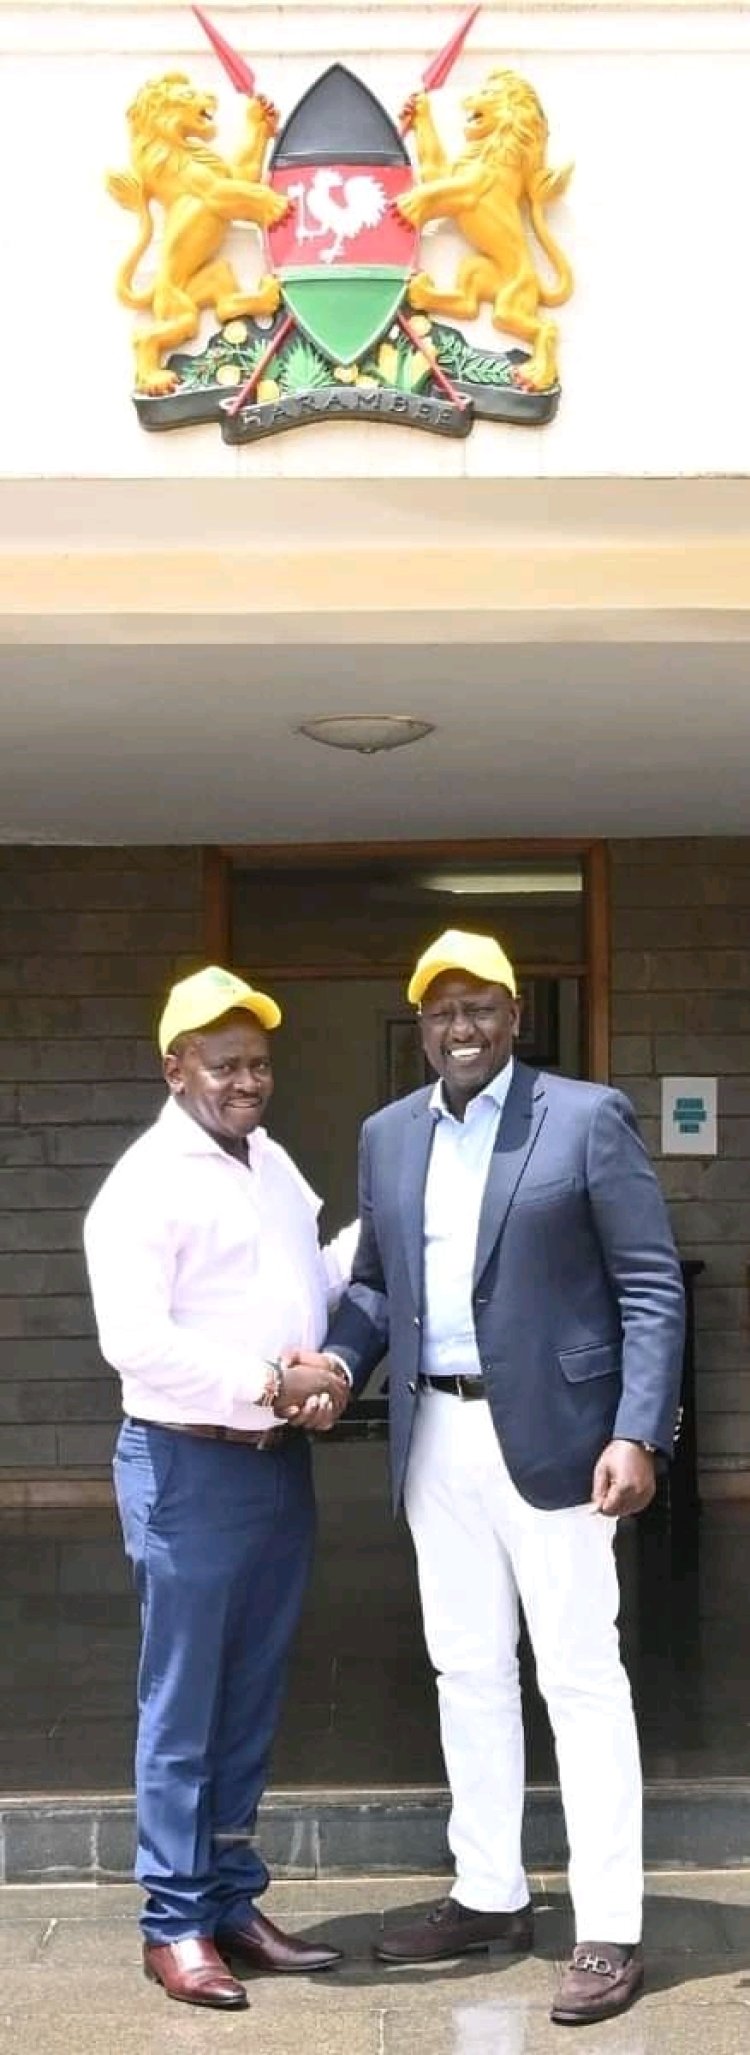 "Welcome to UDA" Ex Powerful Governor Joins DP Ruto's Camp as He Seeks to Be Re-elected